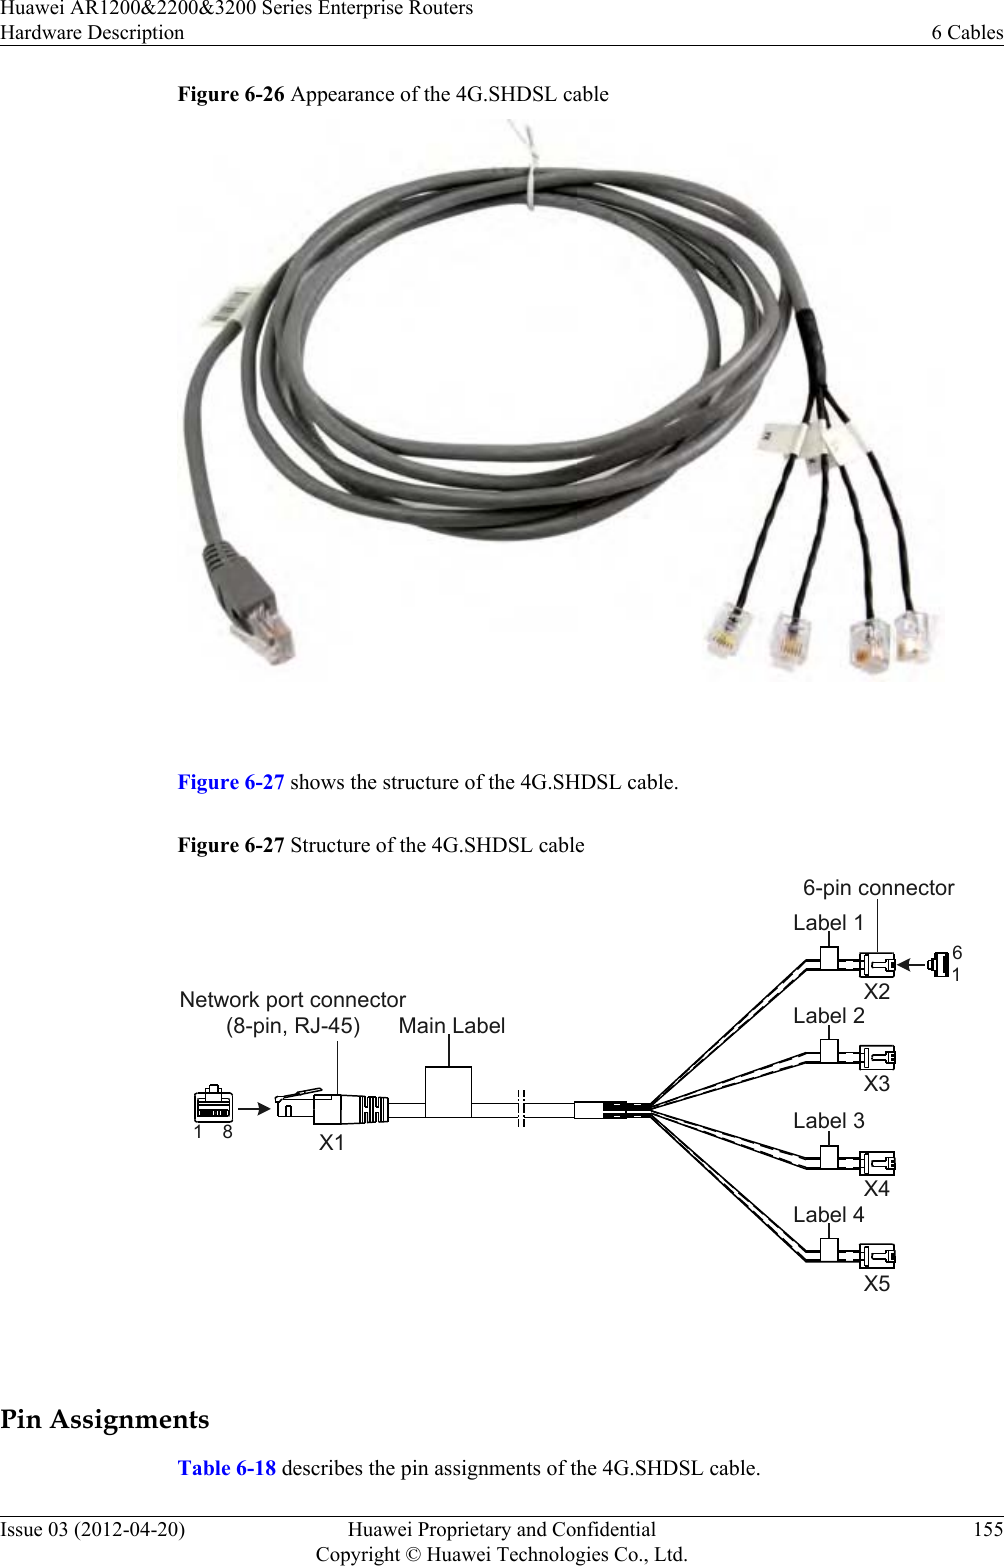 Figure 6-26 Appearance of the 4G.SHDSL cable Figure 6-27 shows the structure of the 4G.SHDSL cable.Figure 6-27 Structure of the 4G.SHDSL cableX11 8Main LabelX2X3X4X516Network port connector(8-pin, RJ-45)Label 1Label 2Label 3Label 46-pin connector Pin AssignmentsTable 6-18 describes the pin assignments of the 4G.SHDSL cable.Huawei AR1200&amp;2200&amp;3200 Series Enterprise RoutersHardware Description 6 CablesIssue 03 (2012-04-20) Huawei Proprietary and ConfidentialCopyright © Huawei Technologies Co., Ltd.155